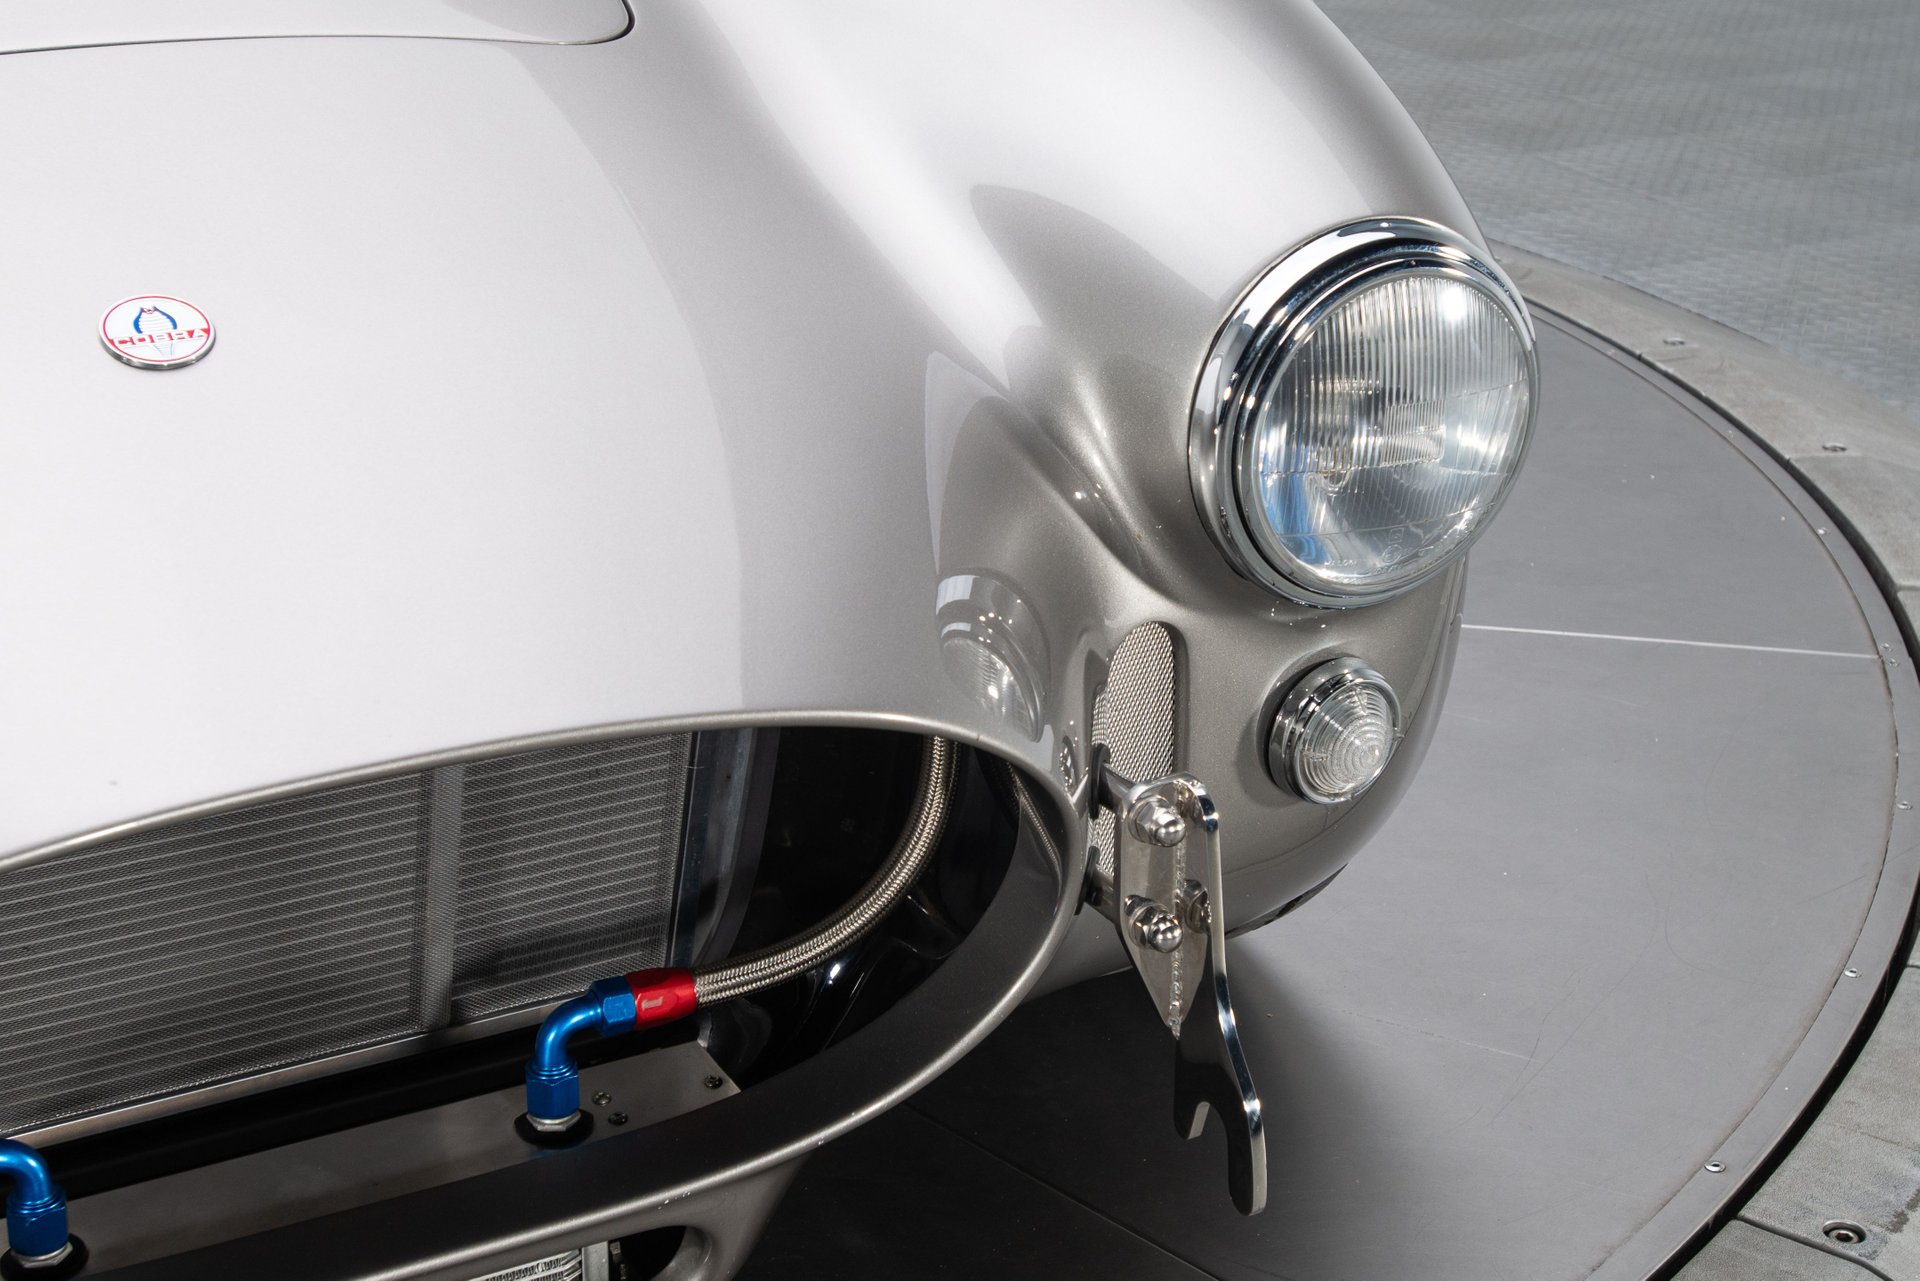 For Sale 1965 Superformance Shelby Cobra